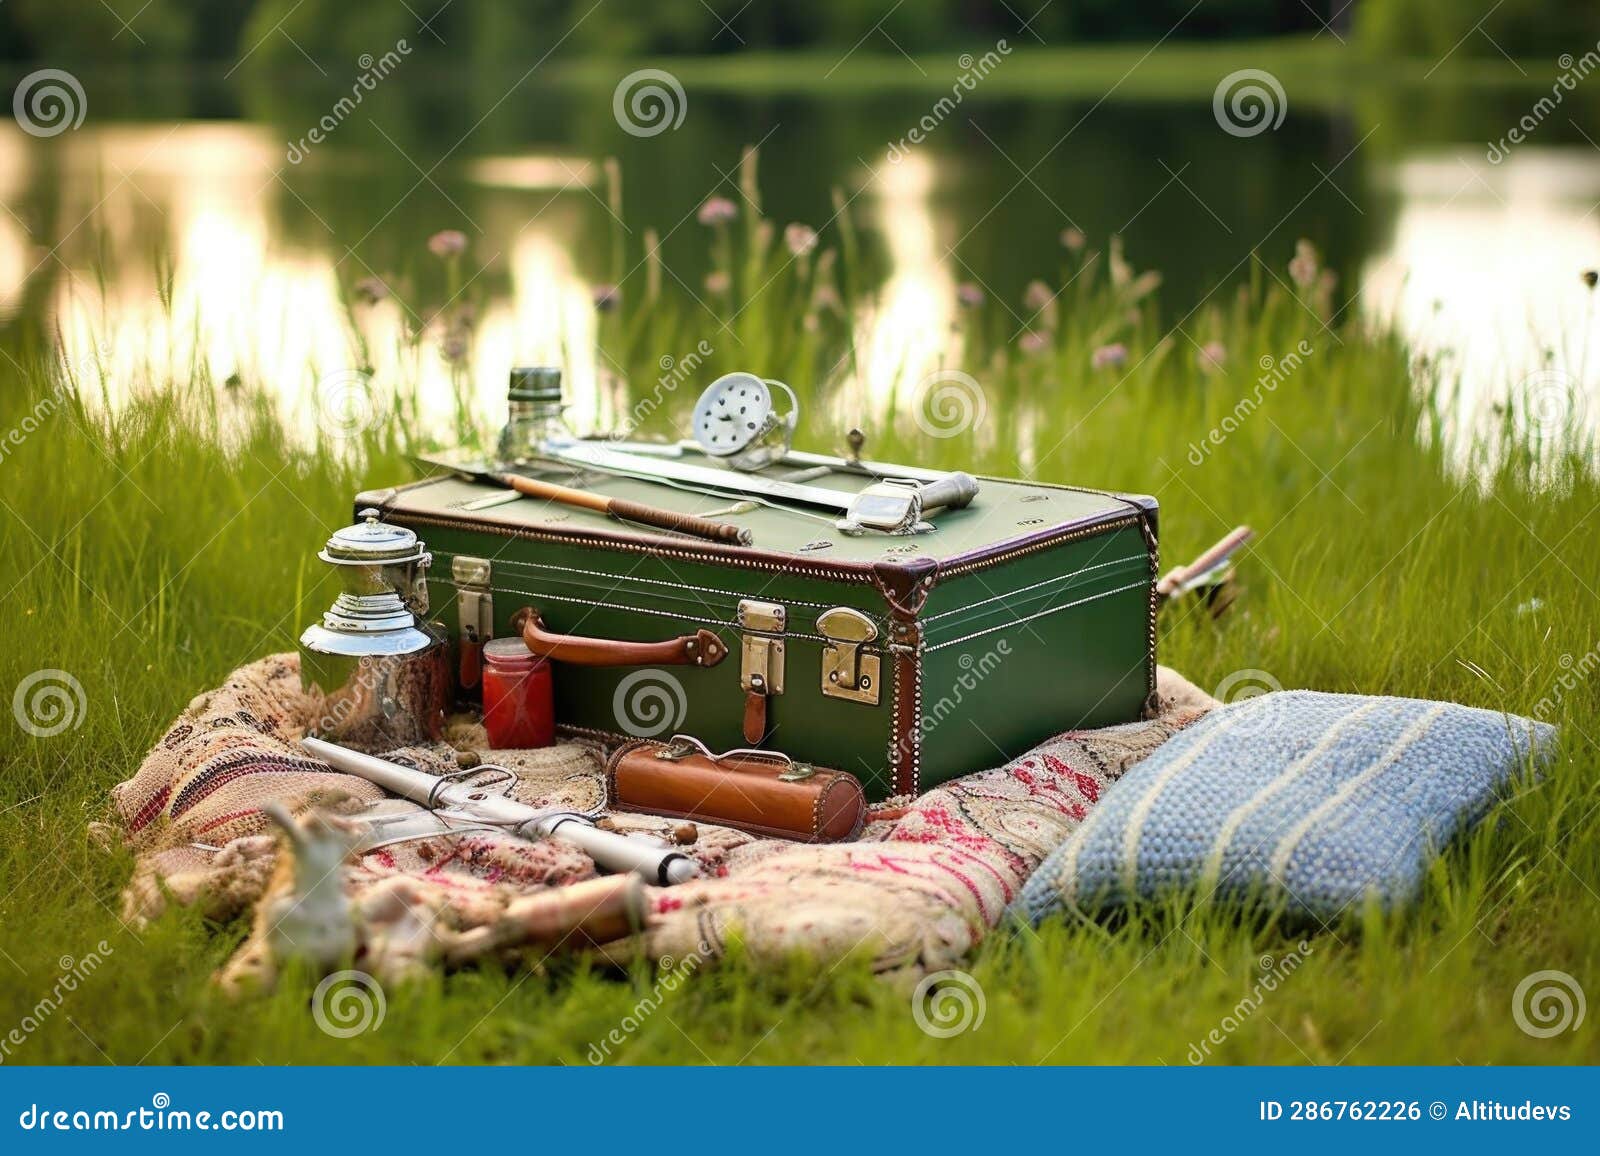 Fishing Rod and Tackle Box on a Grassy Lakeside Picnic Blanket Stock Photo  - Image of picnic, recreation: 286762226